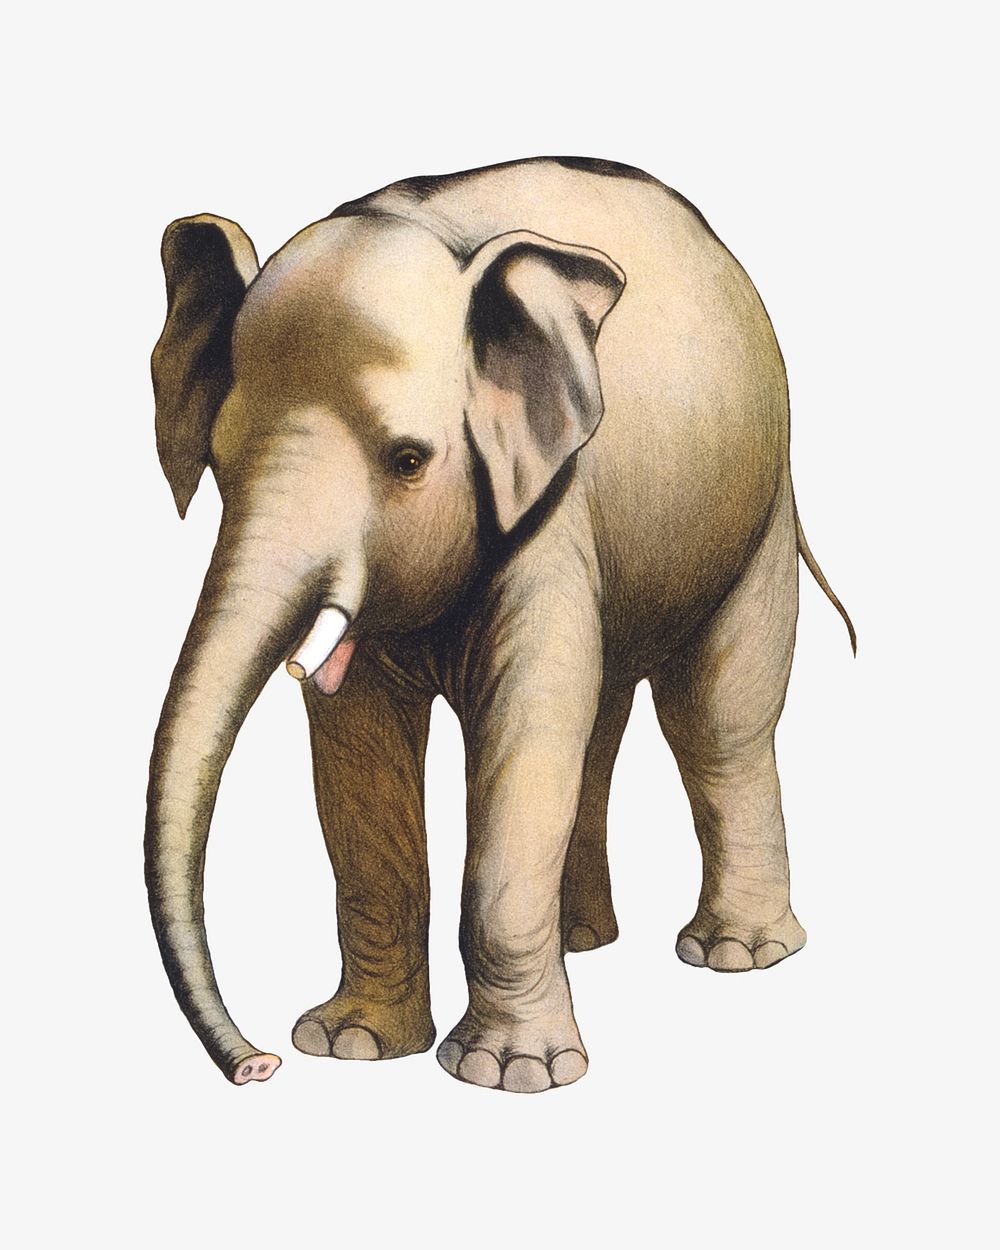 Elephant, African animal illustration.  Remixed by rawpixel.